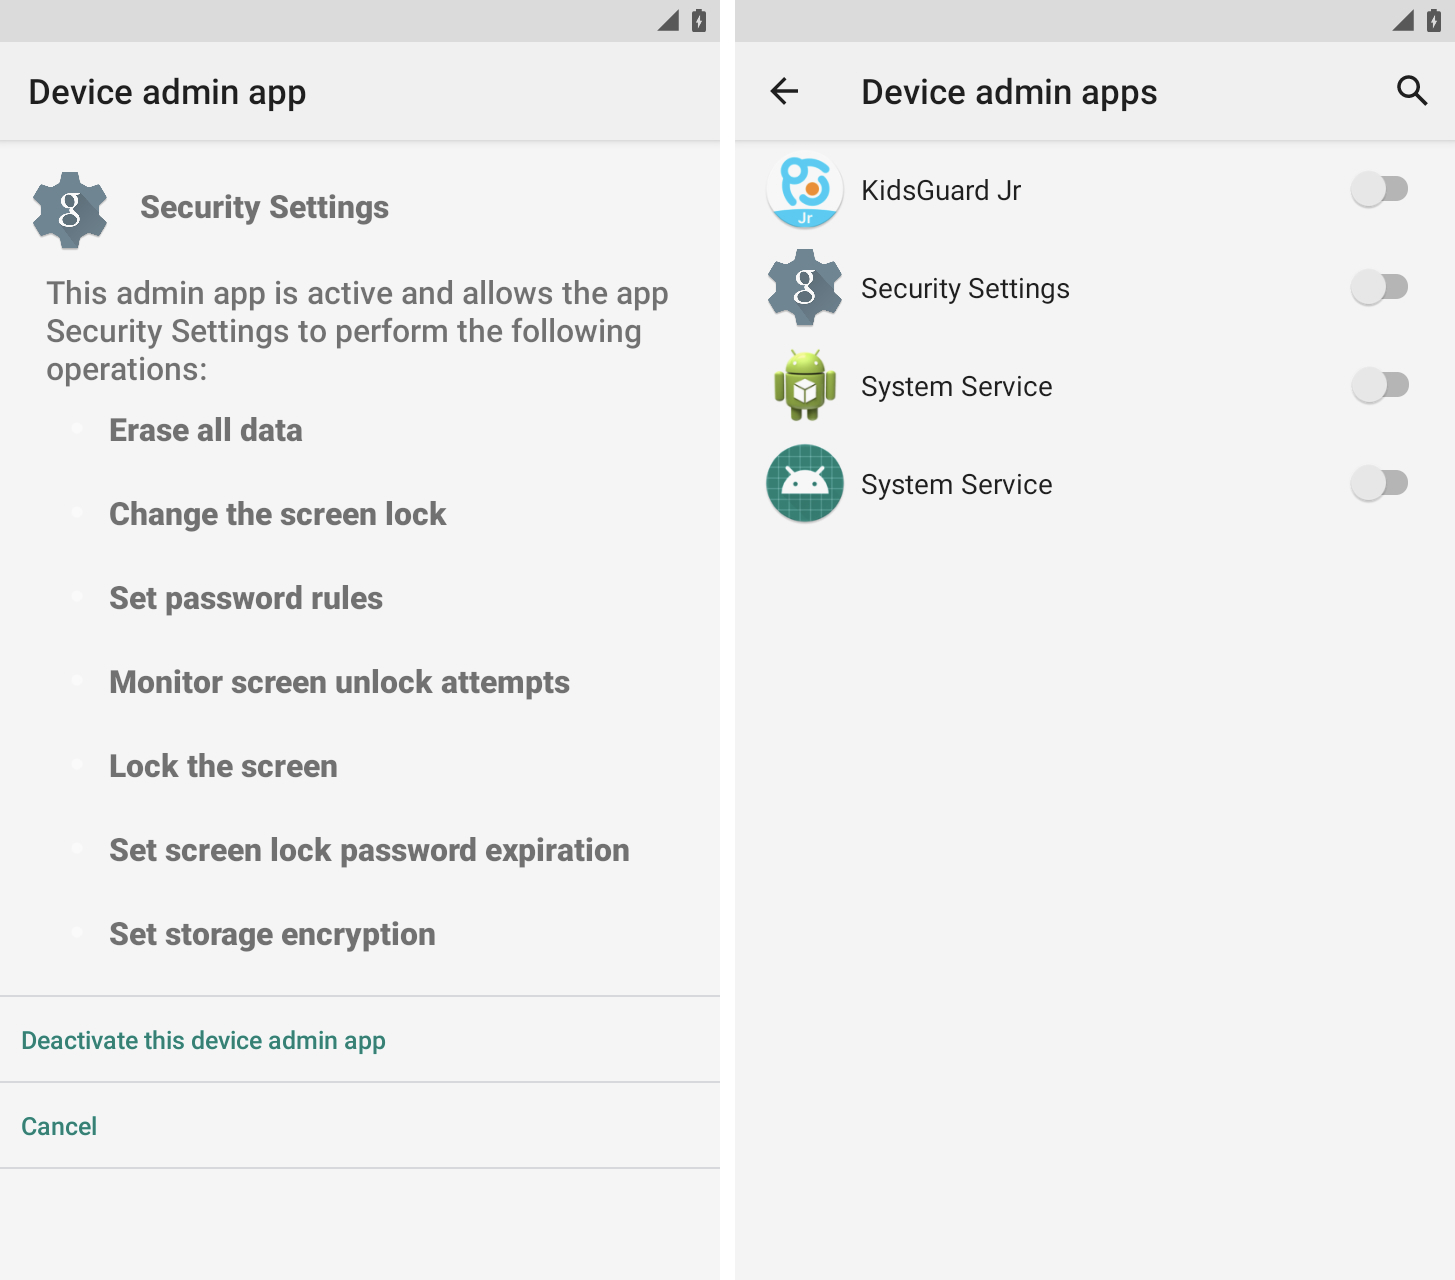 Two screenshots are shown side-by-side, one showing a dangerous appearance. "security settings" An app with full administrative control over the Android device in question. "Erase all data" and "Lock the screen." The second screenshot shows that all currently installed device management apps are turned off.